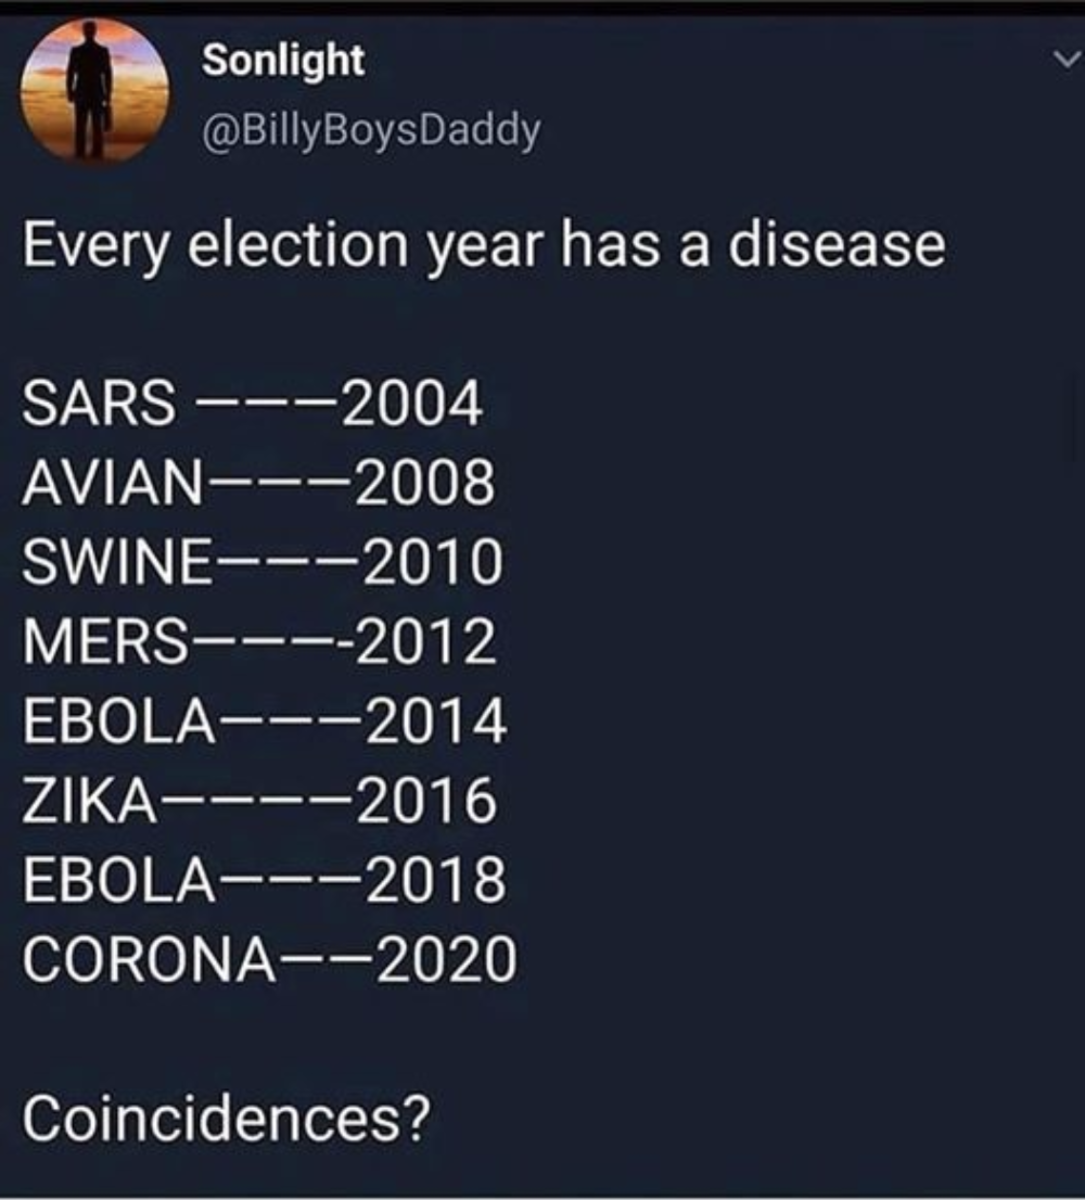 One of the first tweets to list dates and supposedly corresponding diseases for election years